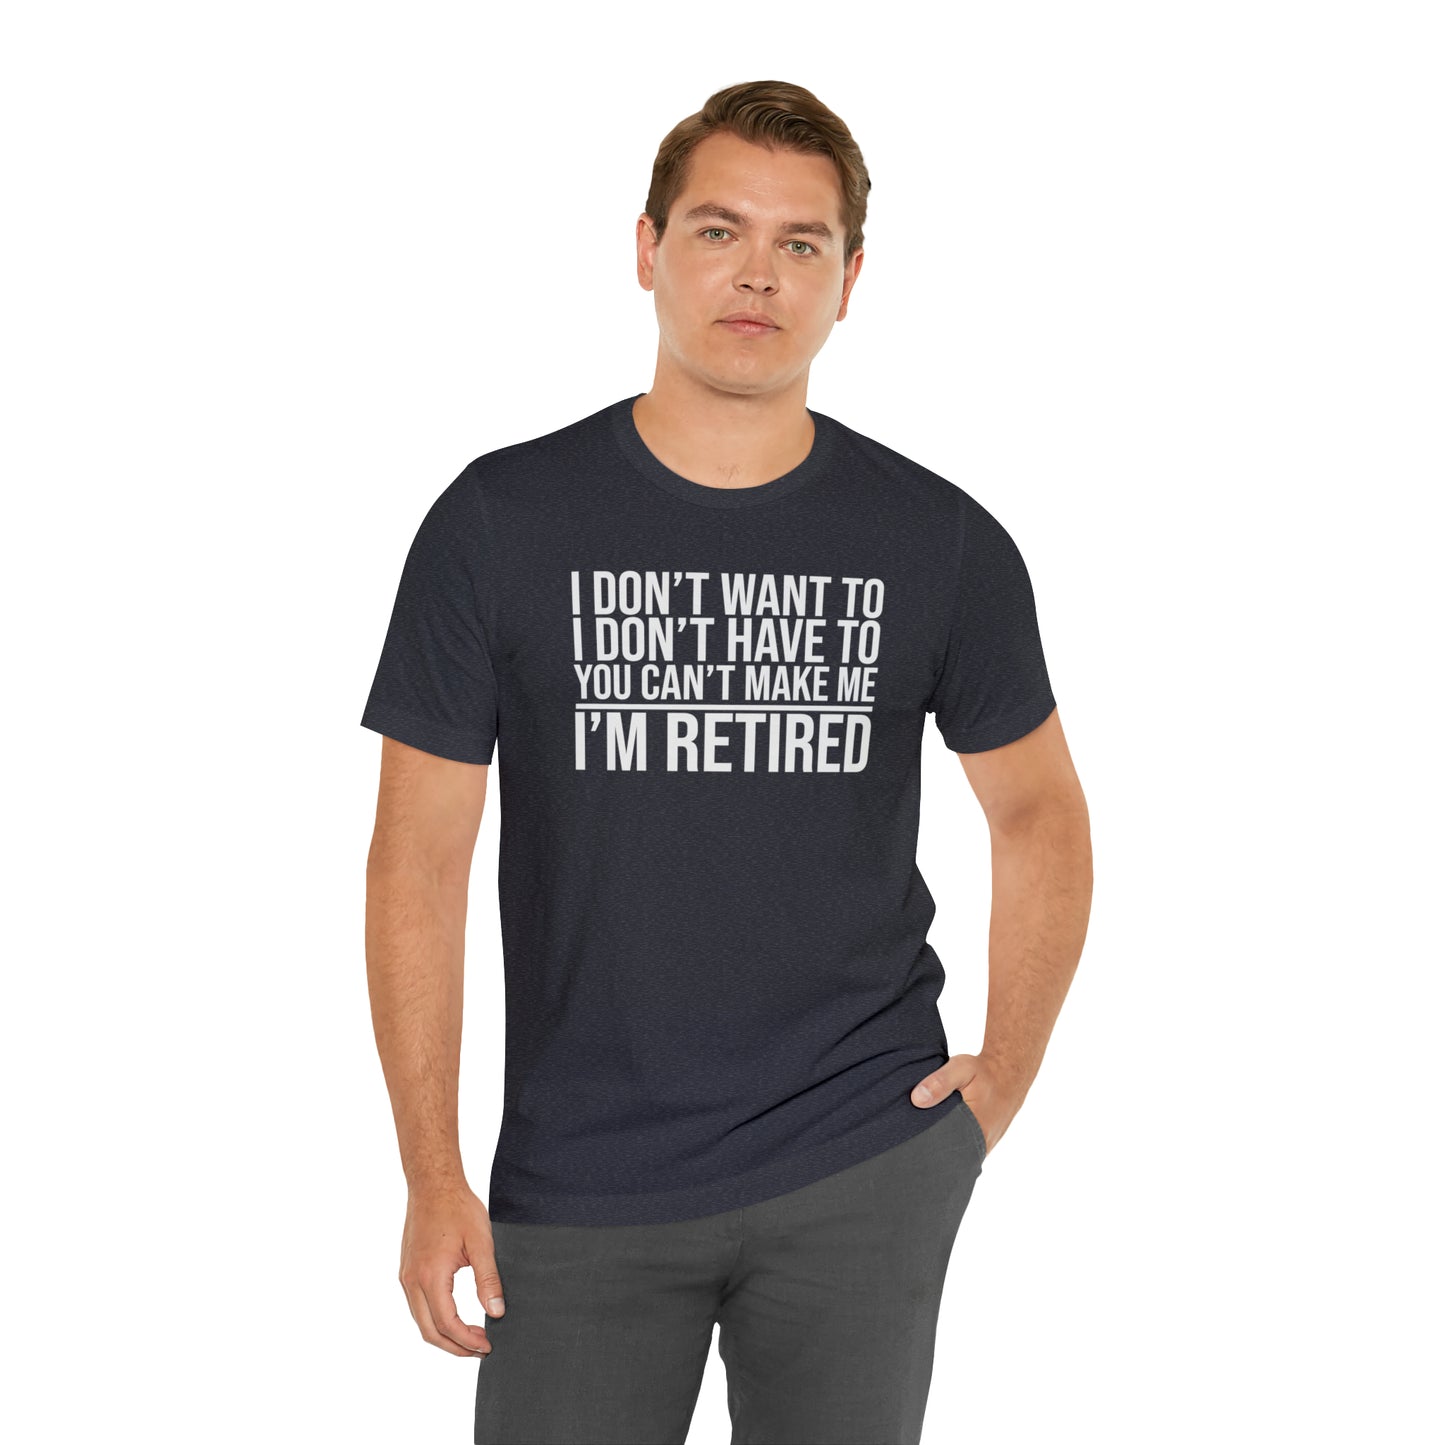 I Don't Want to I Don't Have to I'm Retired T-Shirt, Retirement Party, Retirement Gift for Men or Women, End of Work Shirt, Do It Yourself